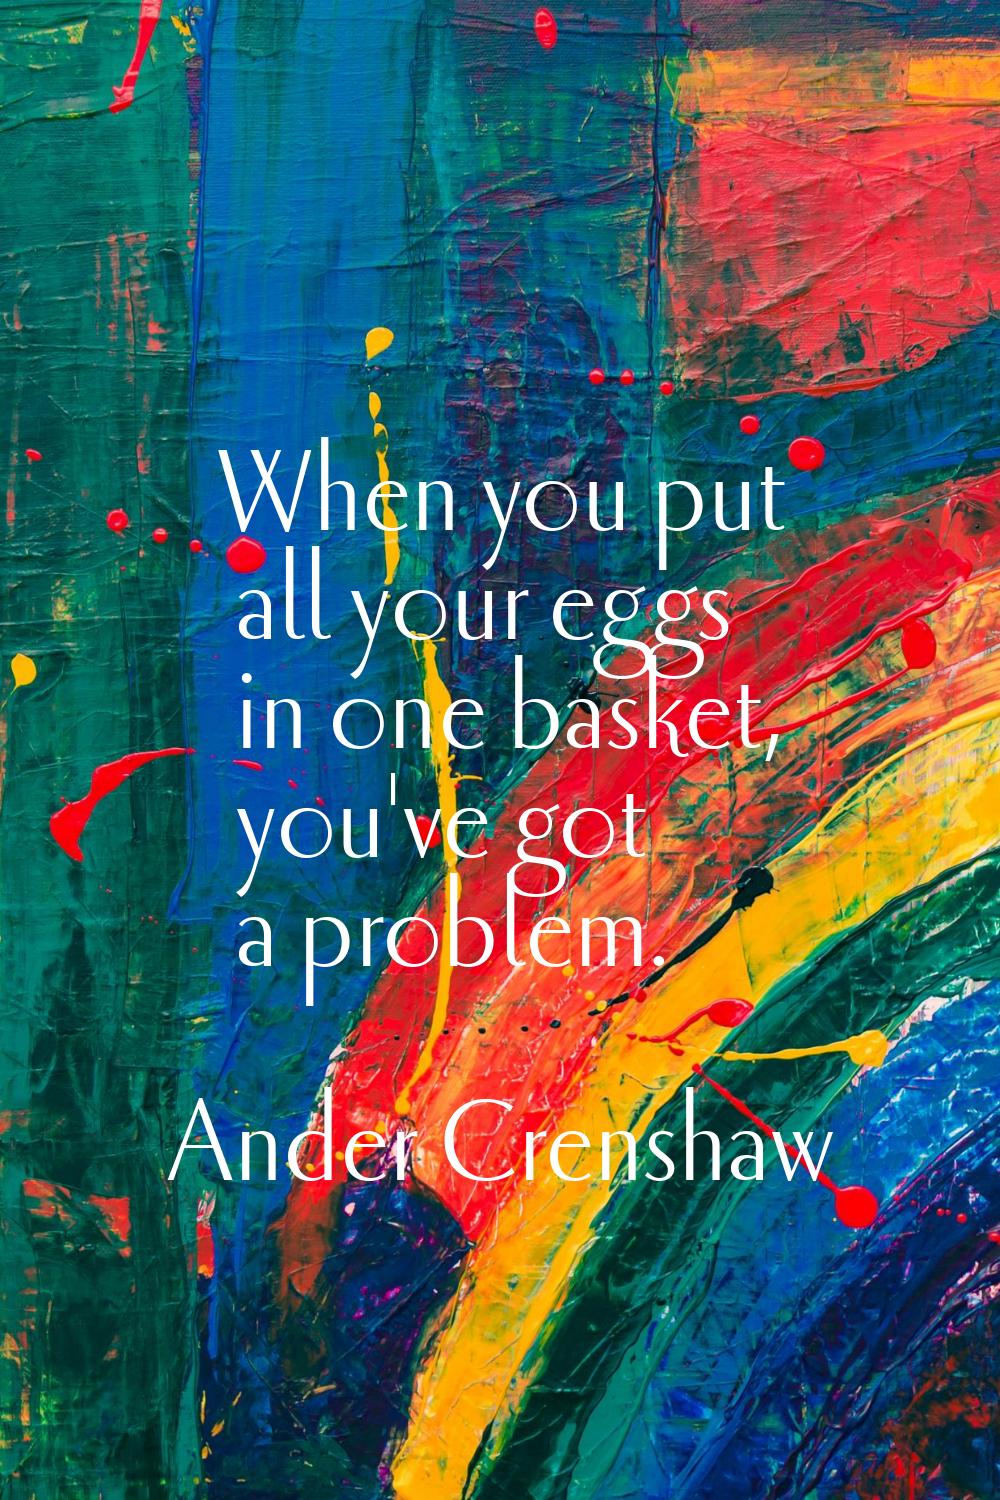 When you put all your eggs in one basket, you've got a problem.